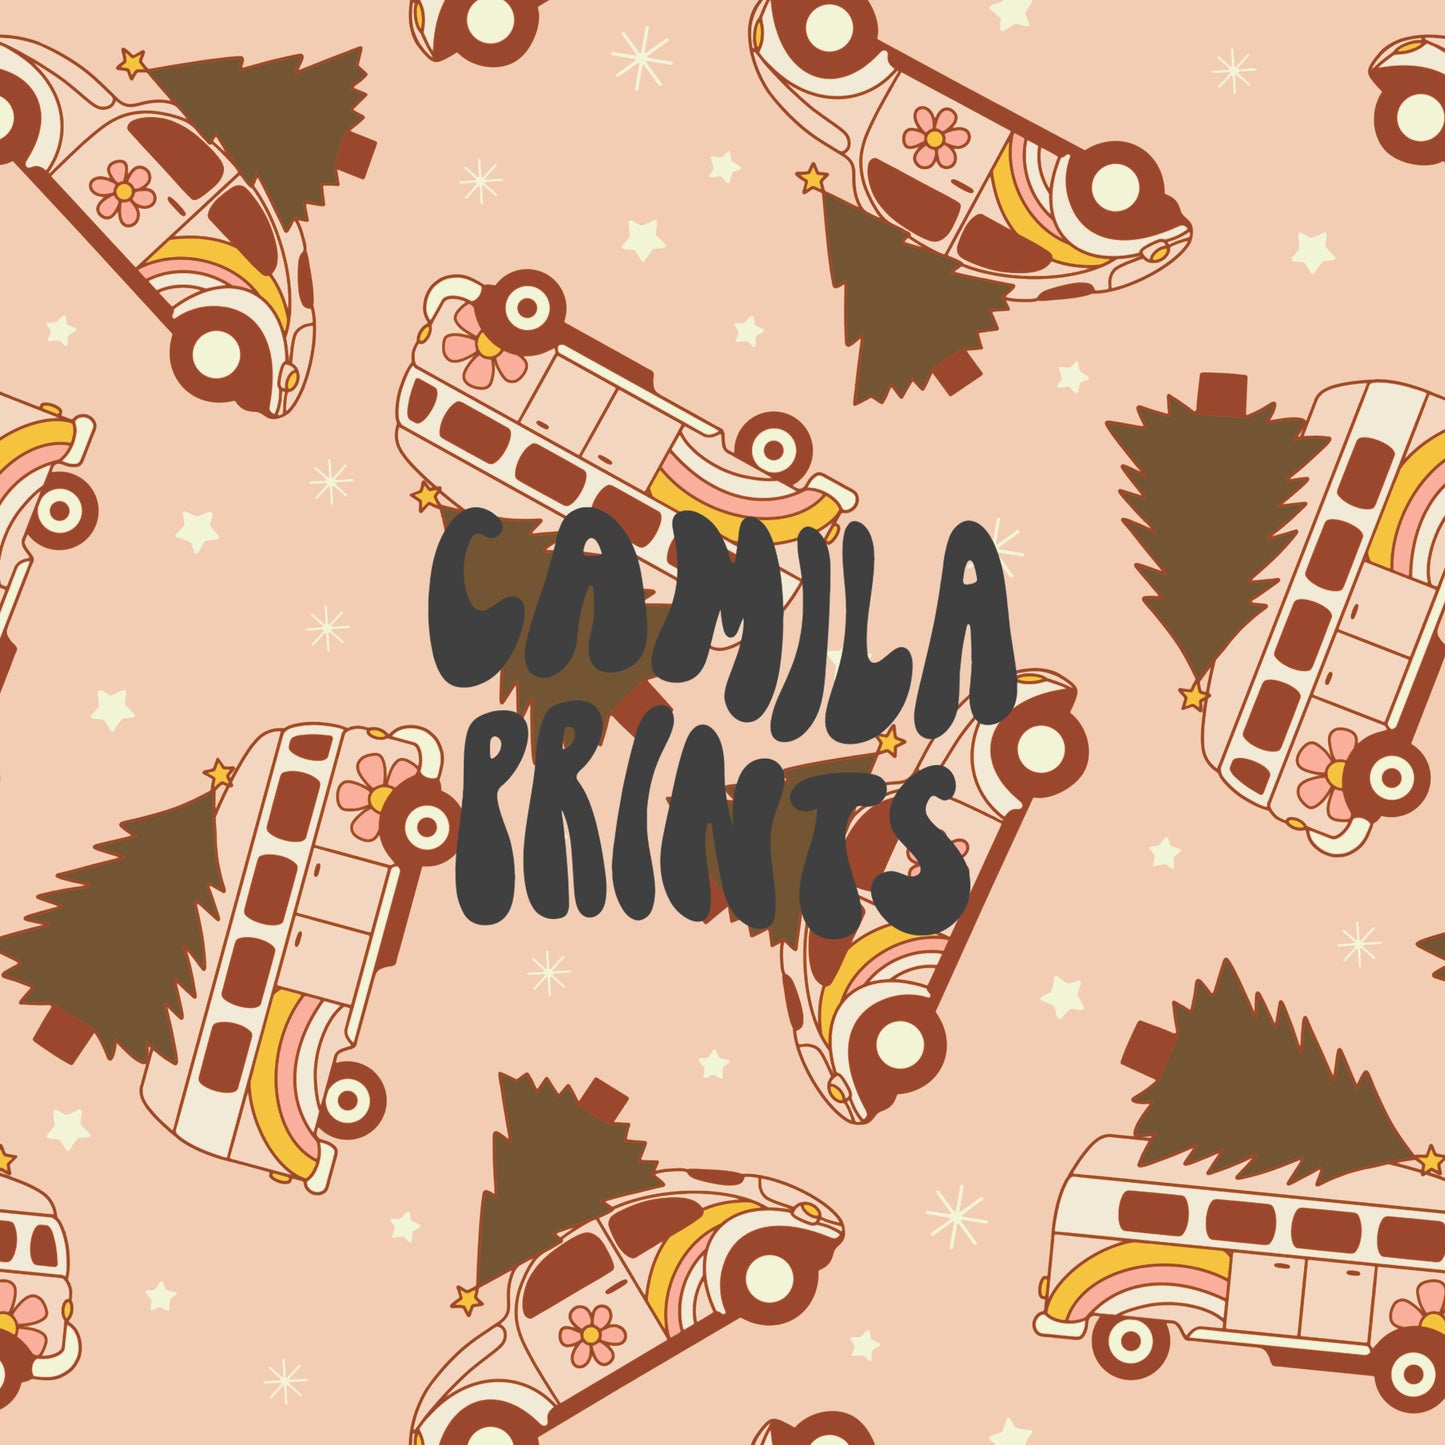 Groovy Retro Christmas Seamless File Boho Repeat Pattern Digital Download for Commercial Use